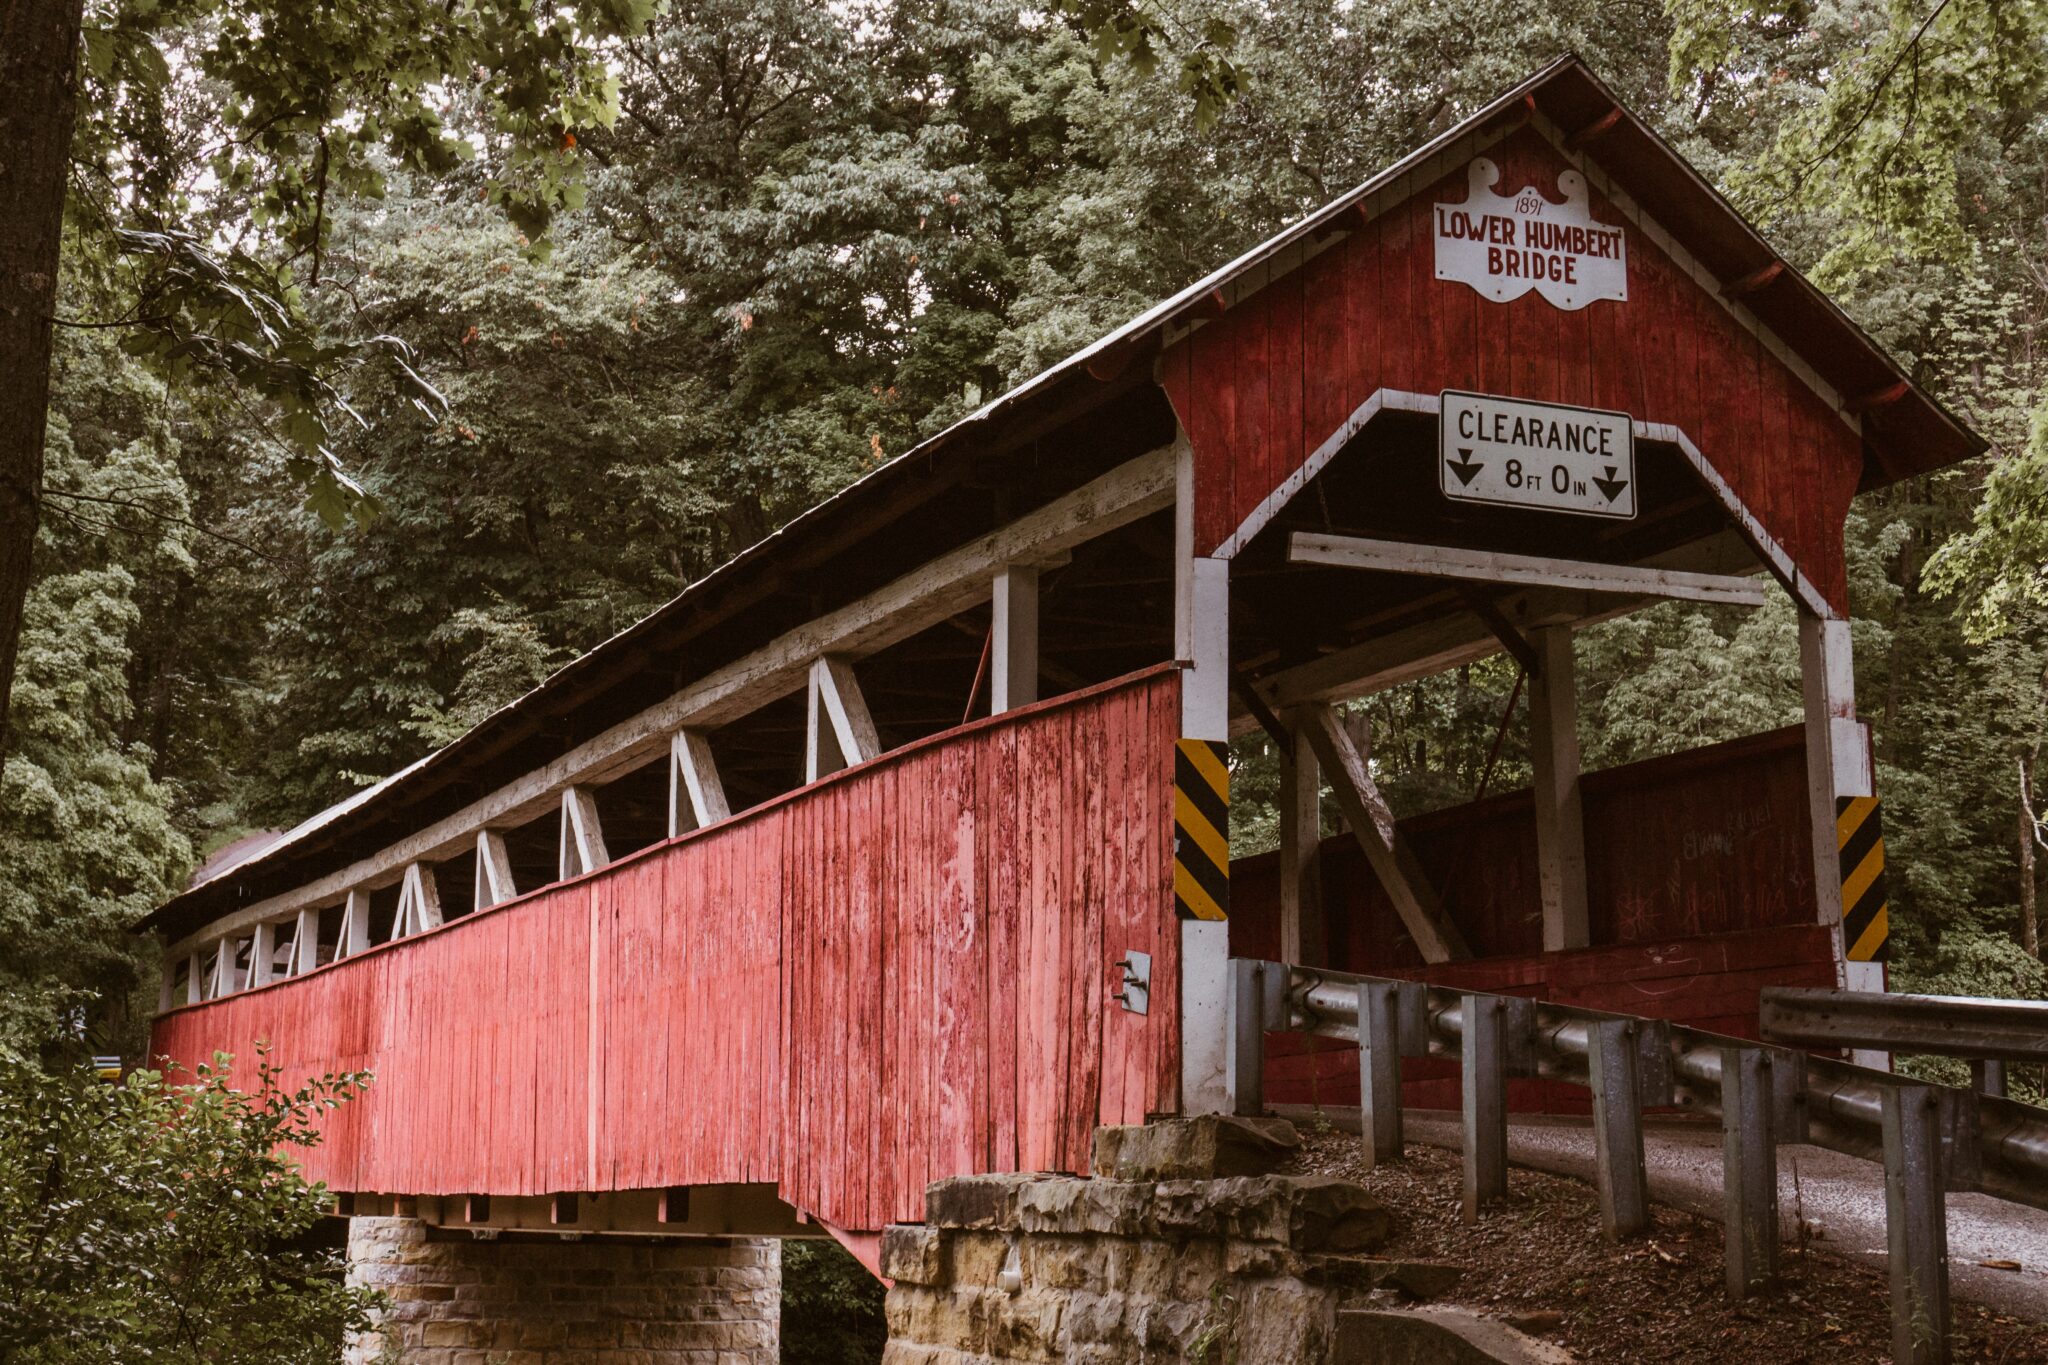 Your Guide to Covered Bridges near Bloomsburg, PA